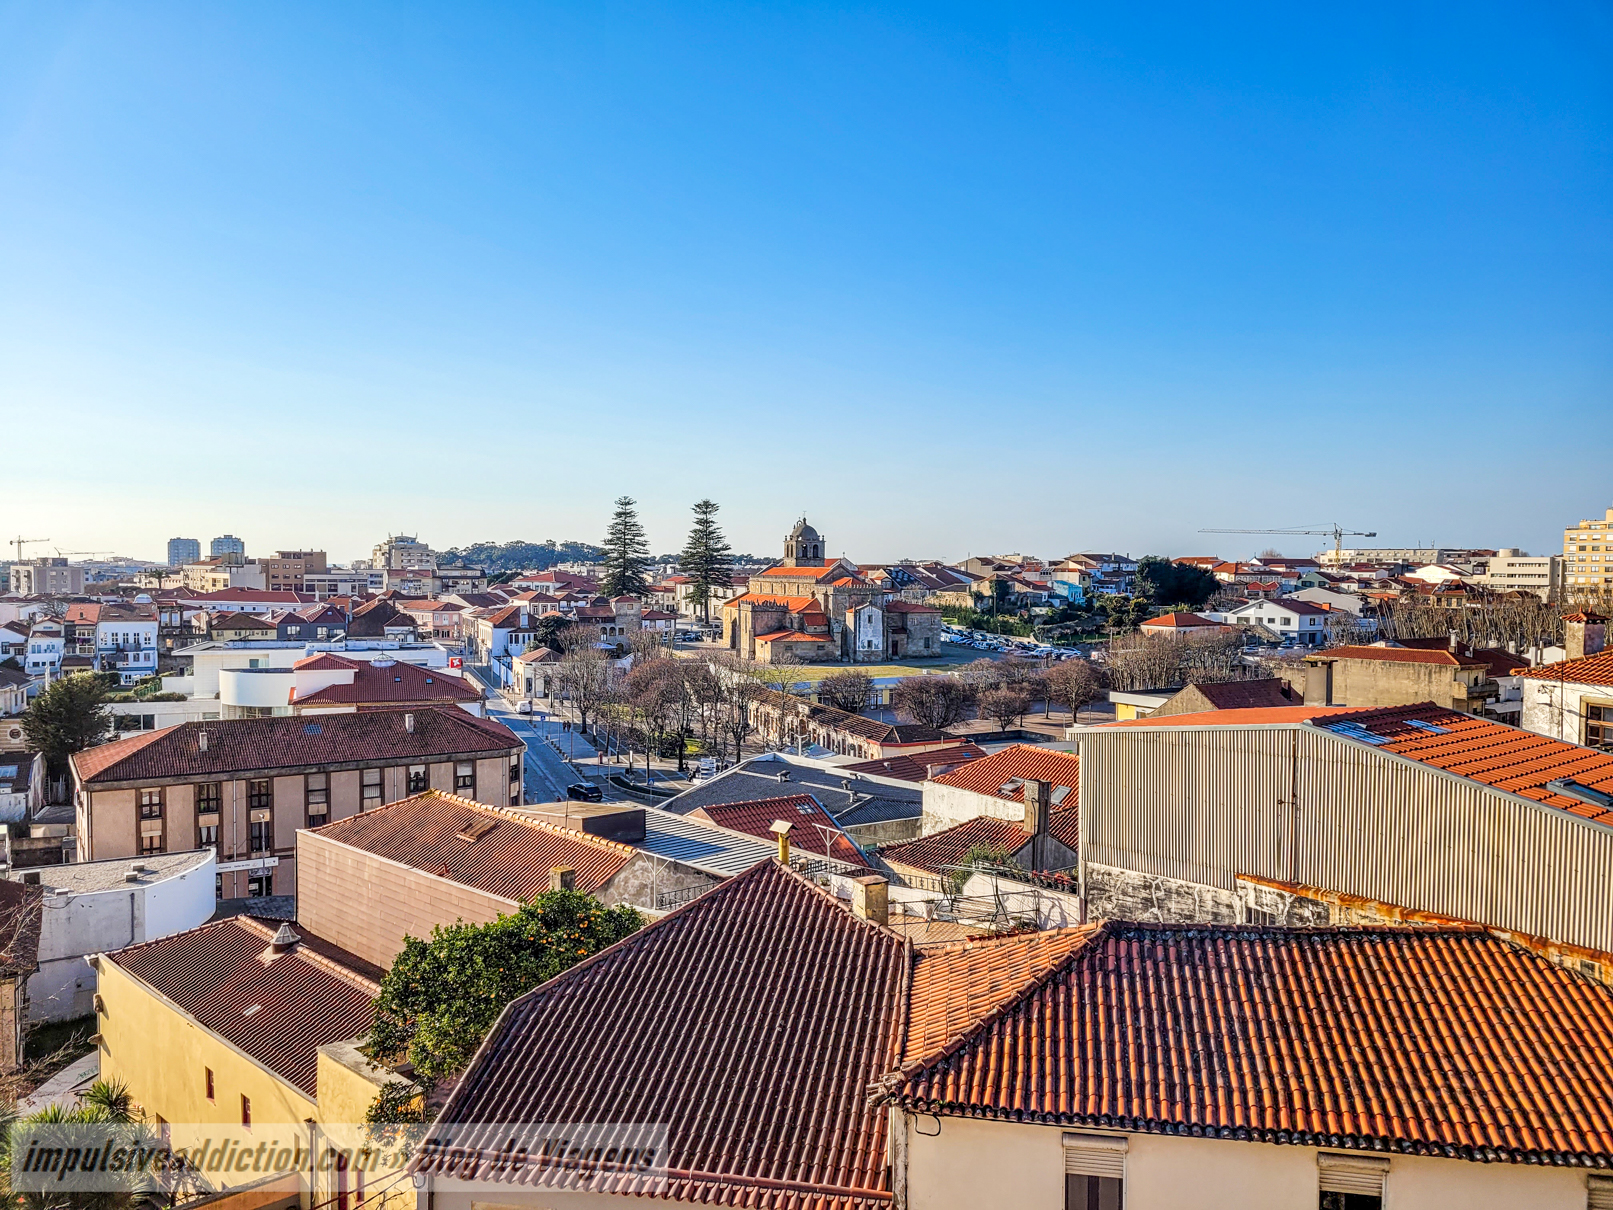 Viewpoint to the city of Vila do Conde